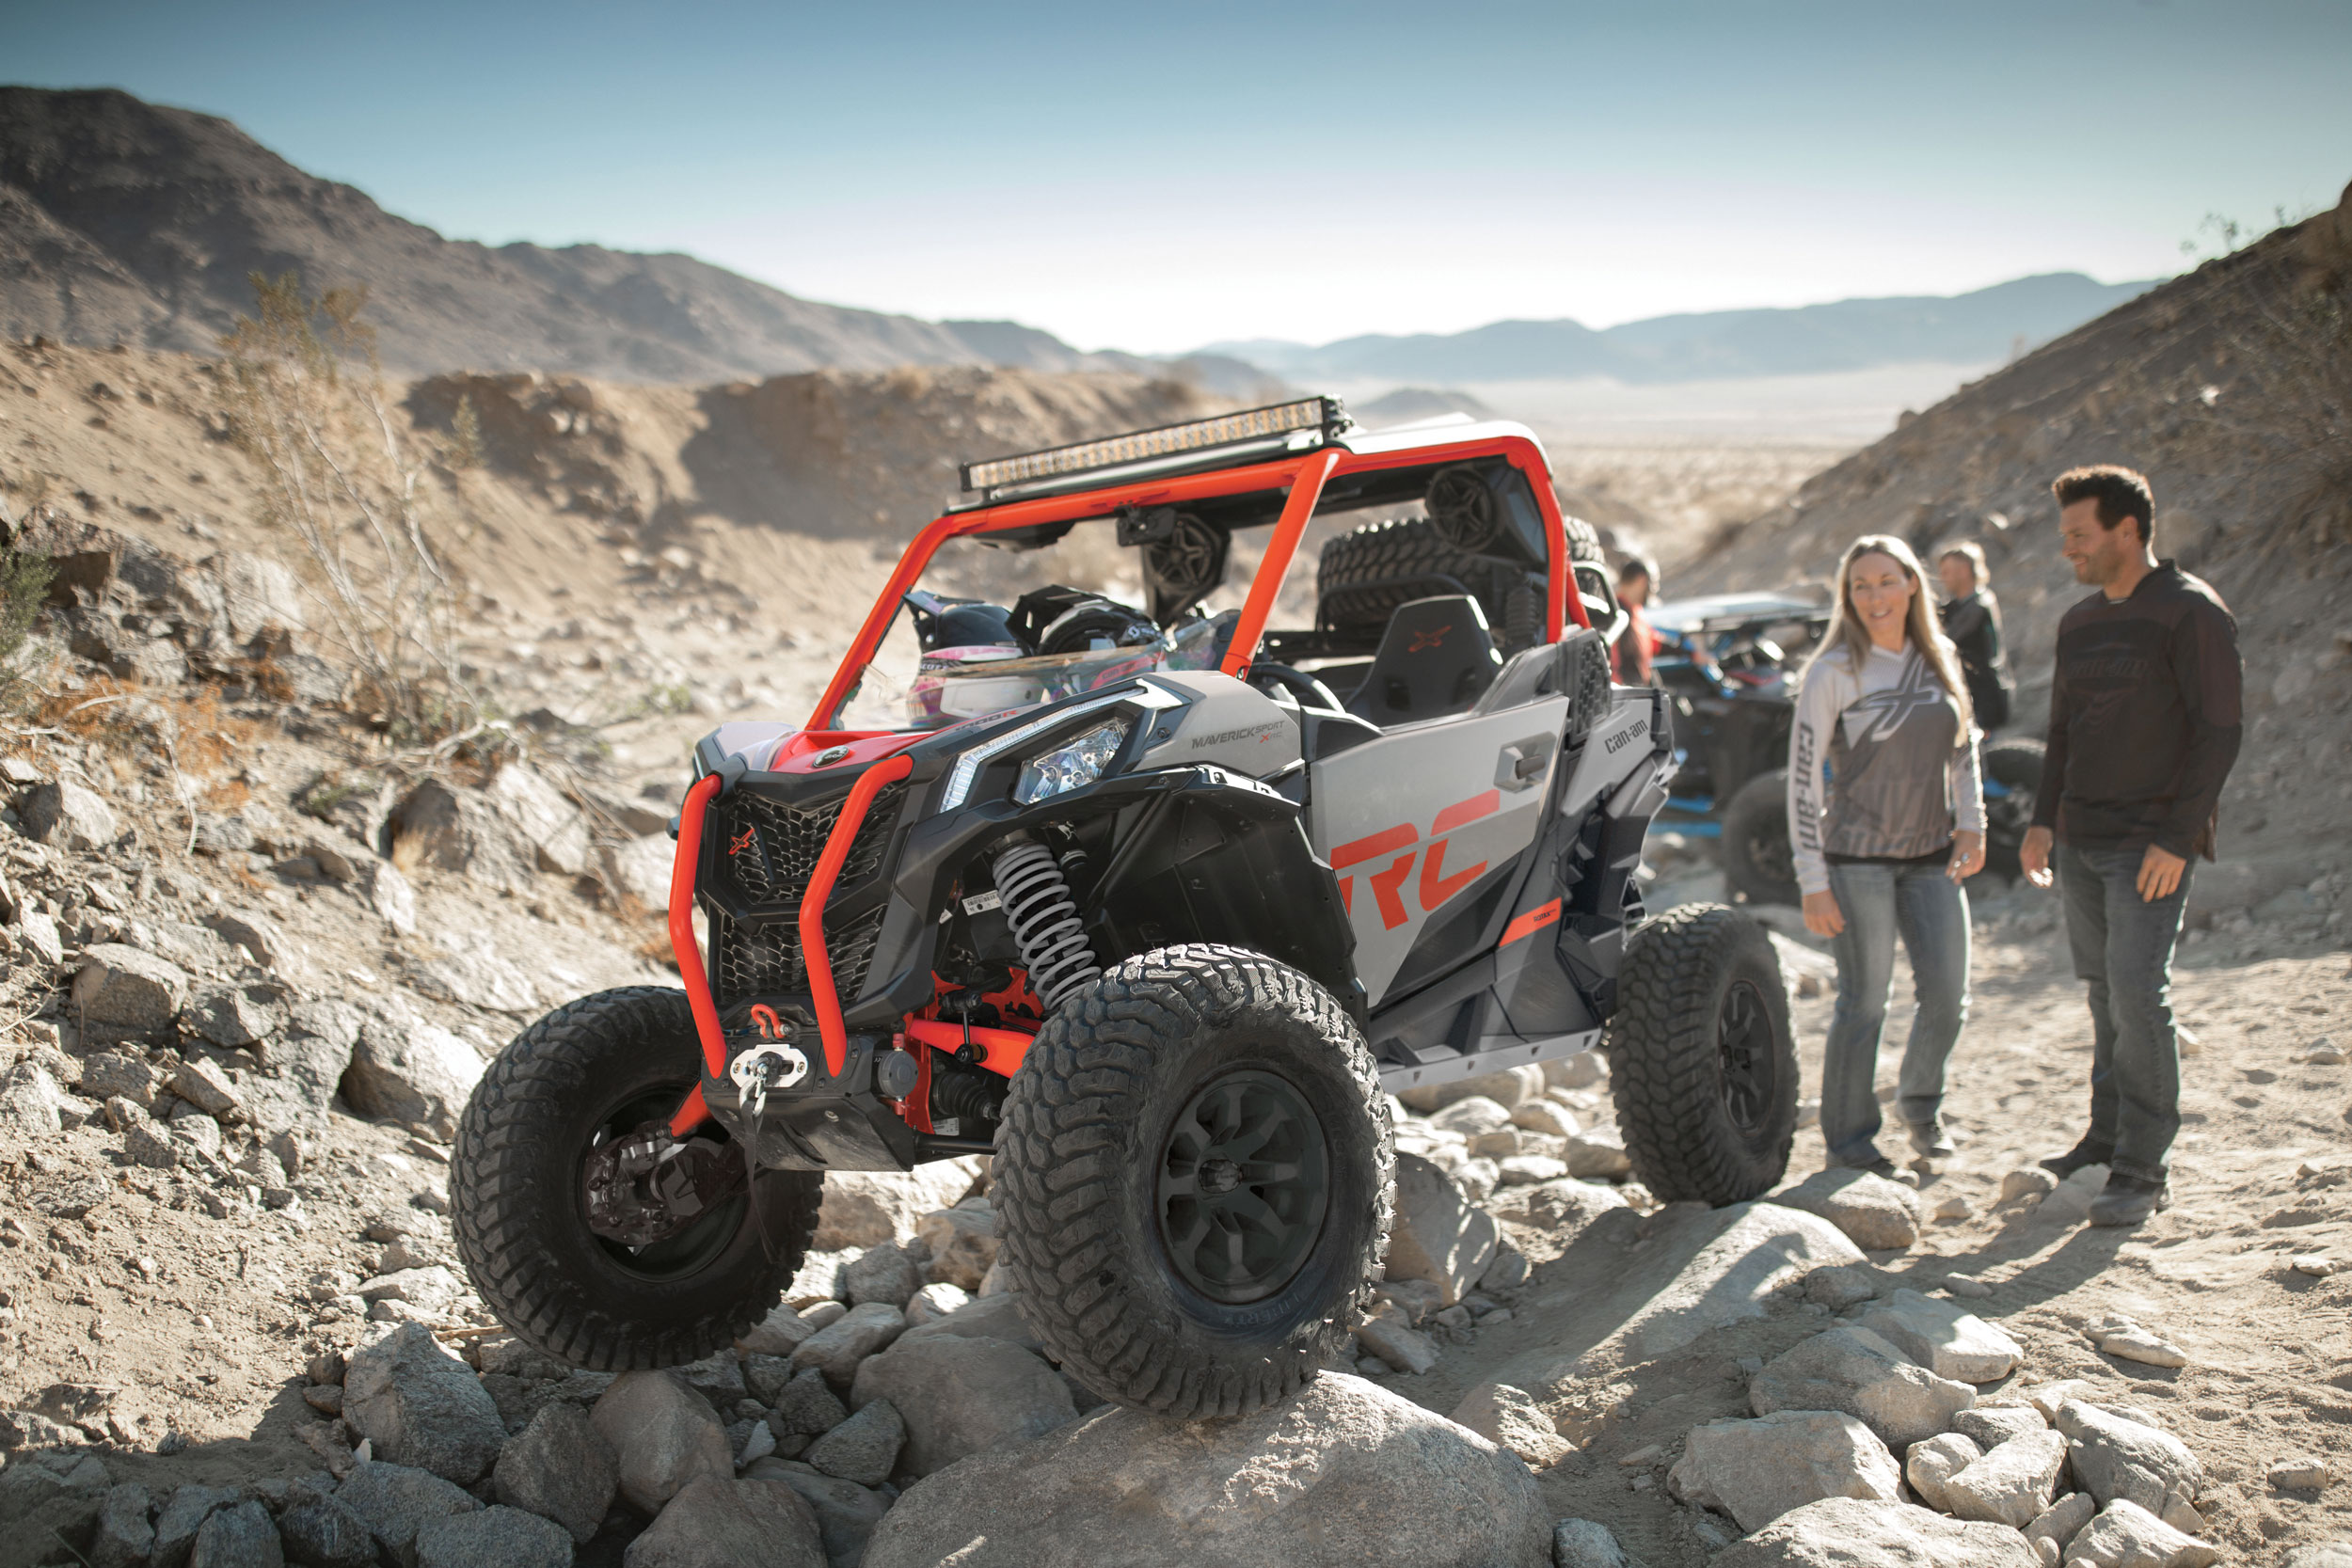 A Liquid Titanium and Magma Red Can-Am Maverick Sport X XC parked in a rocky setting. 